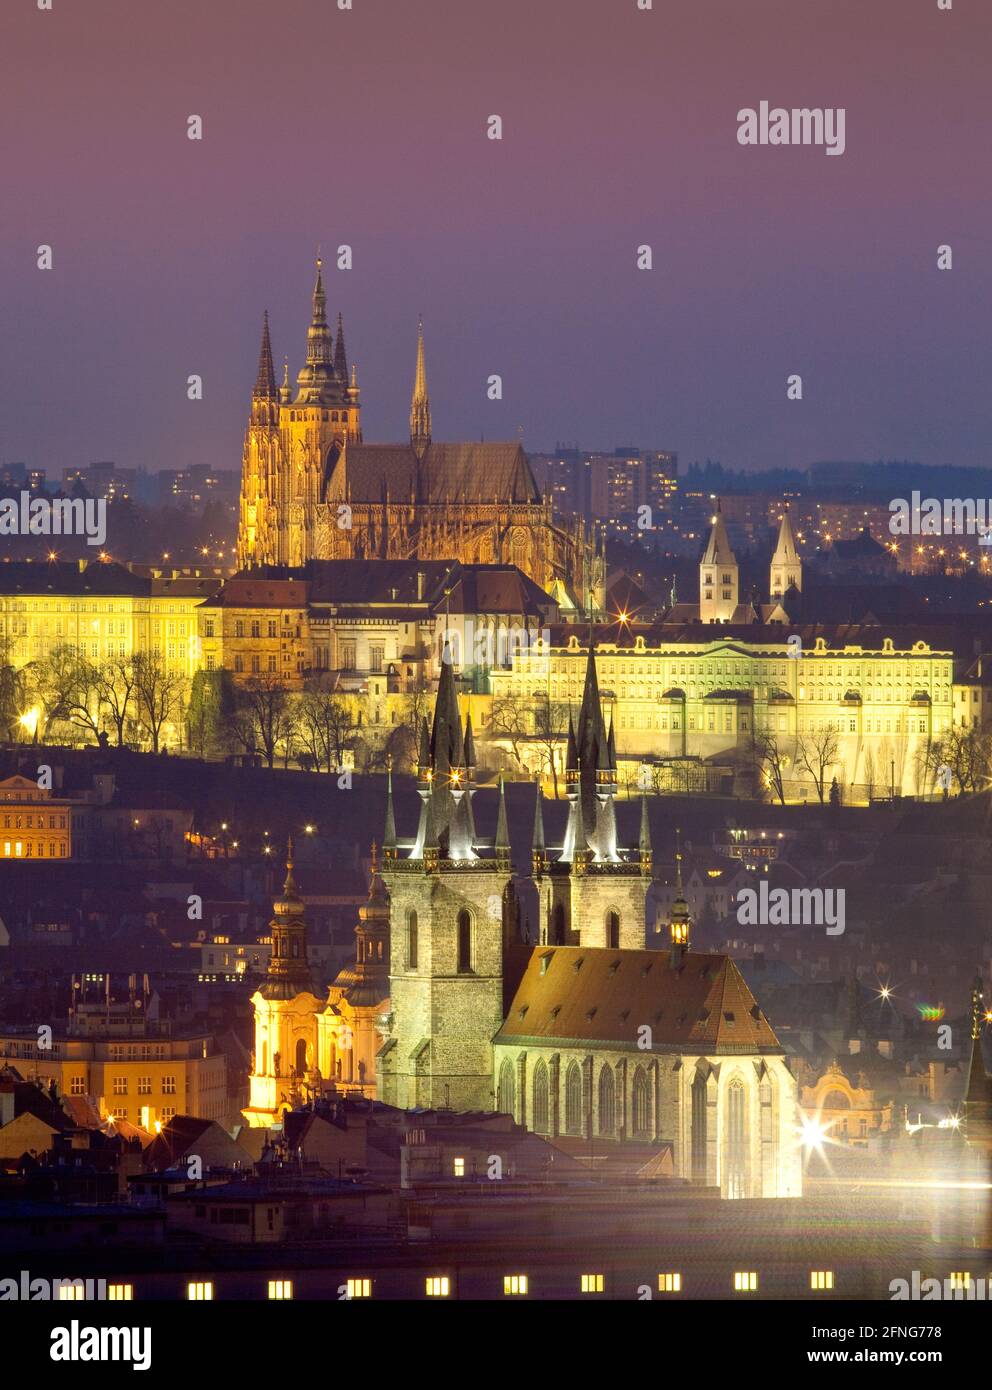 Prague, Czechia. Hradcany castle and spires of the Old town at dusk. Stock Photo